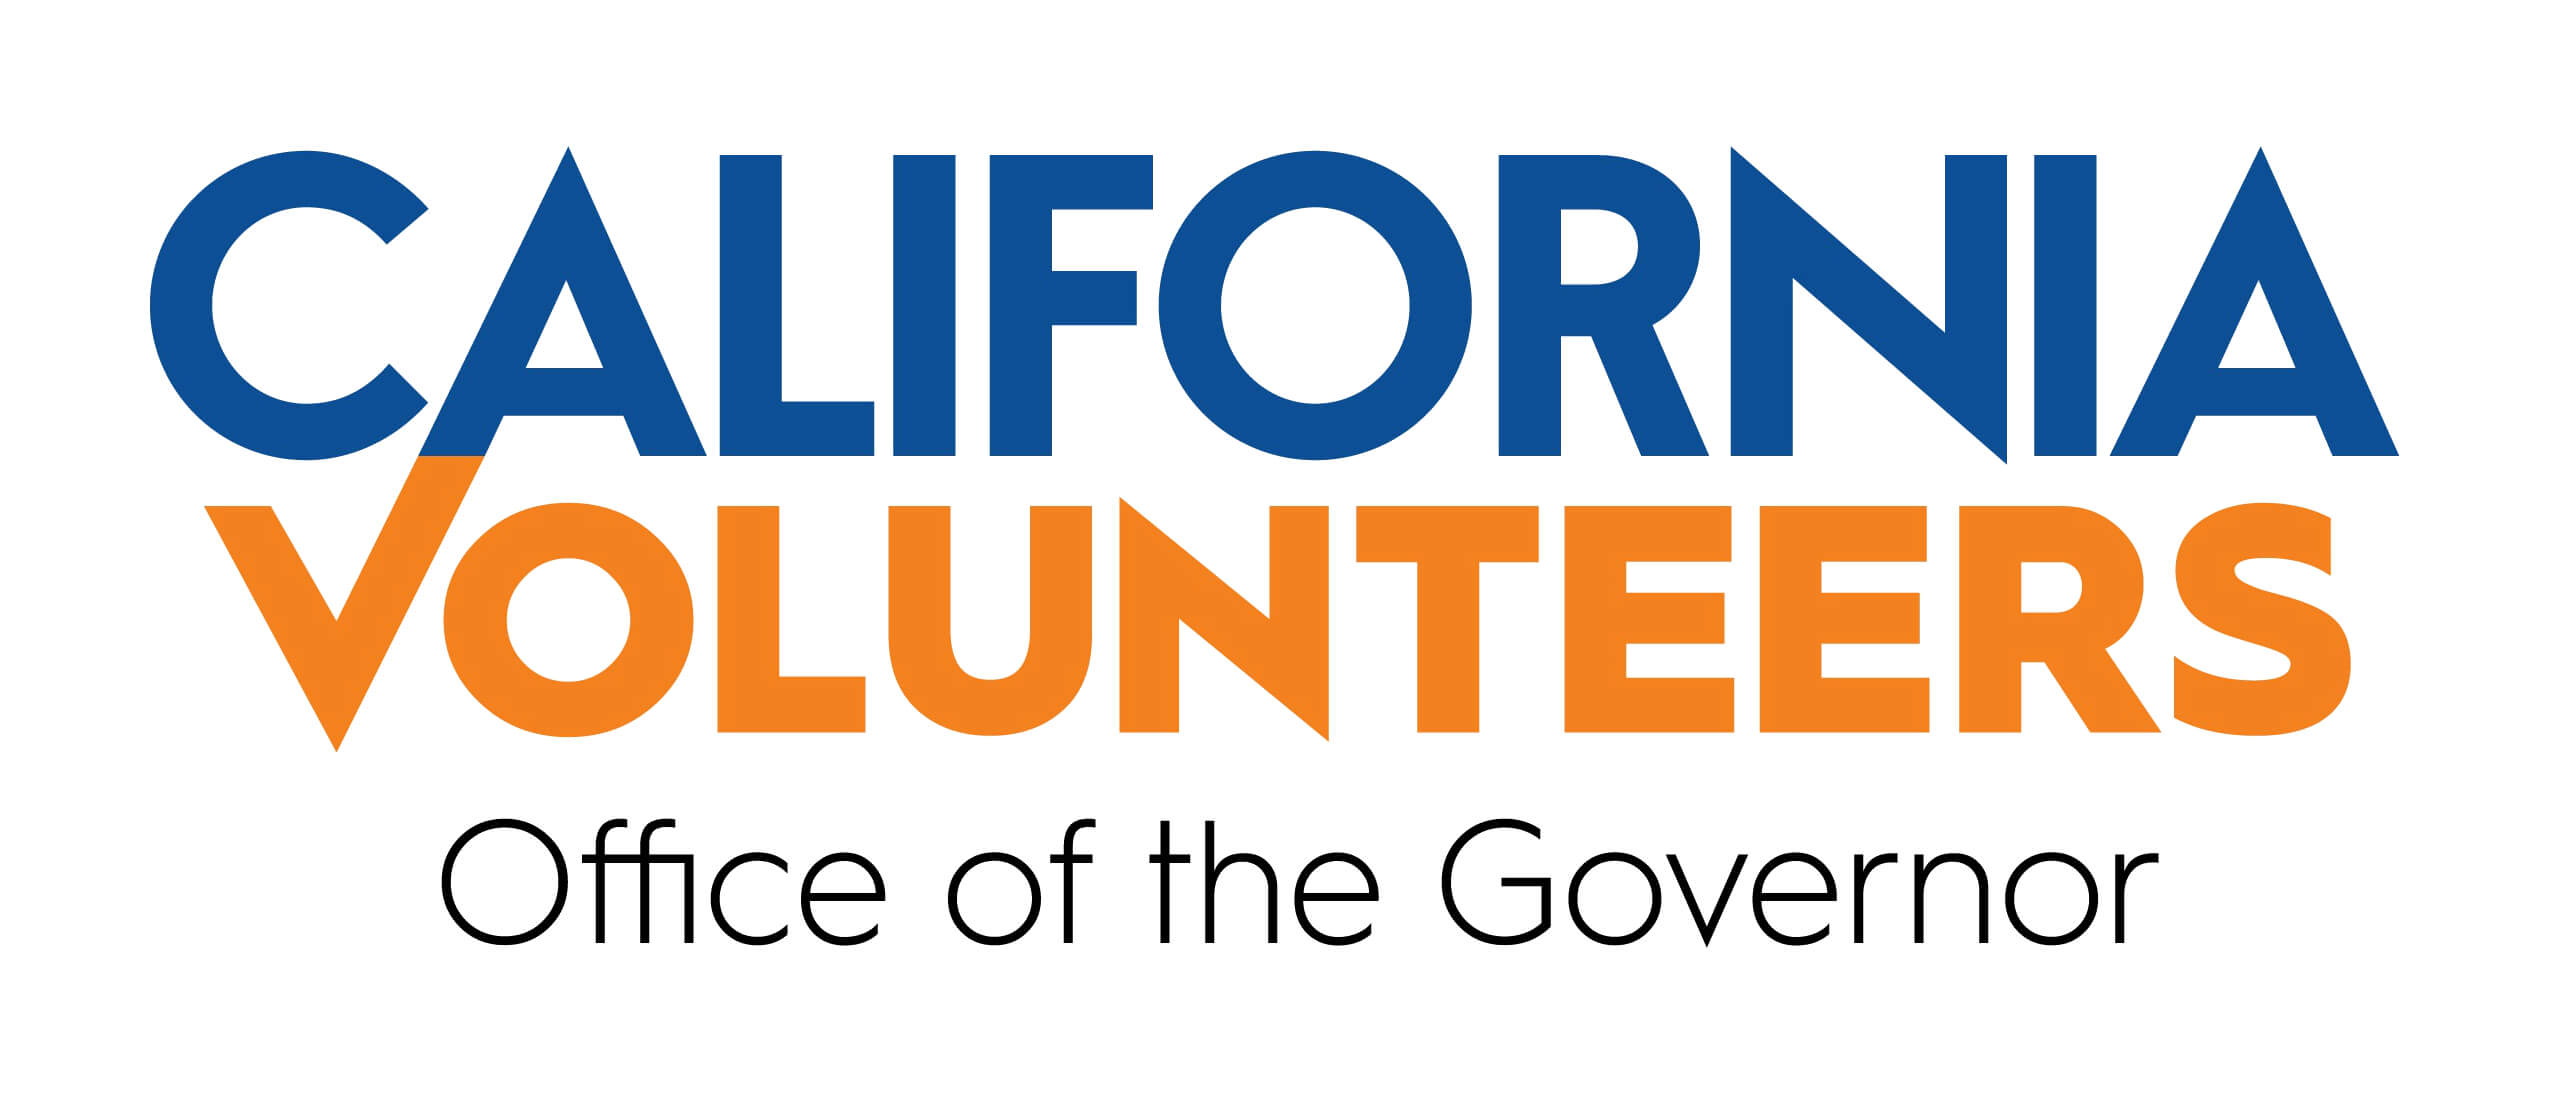 California Volunteer, Office of the Governor (through AmeriCorps)